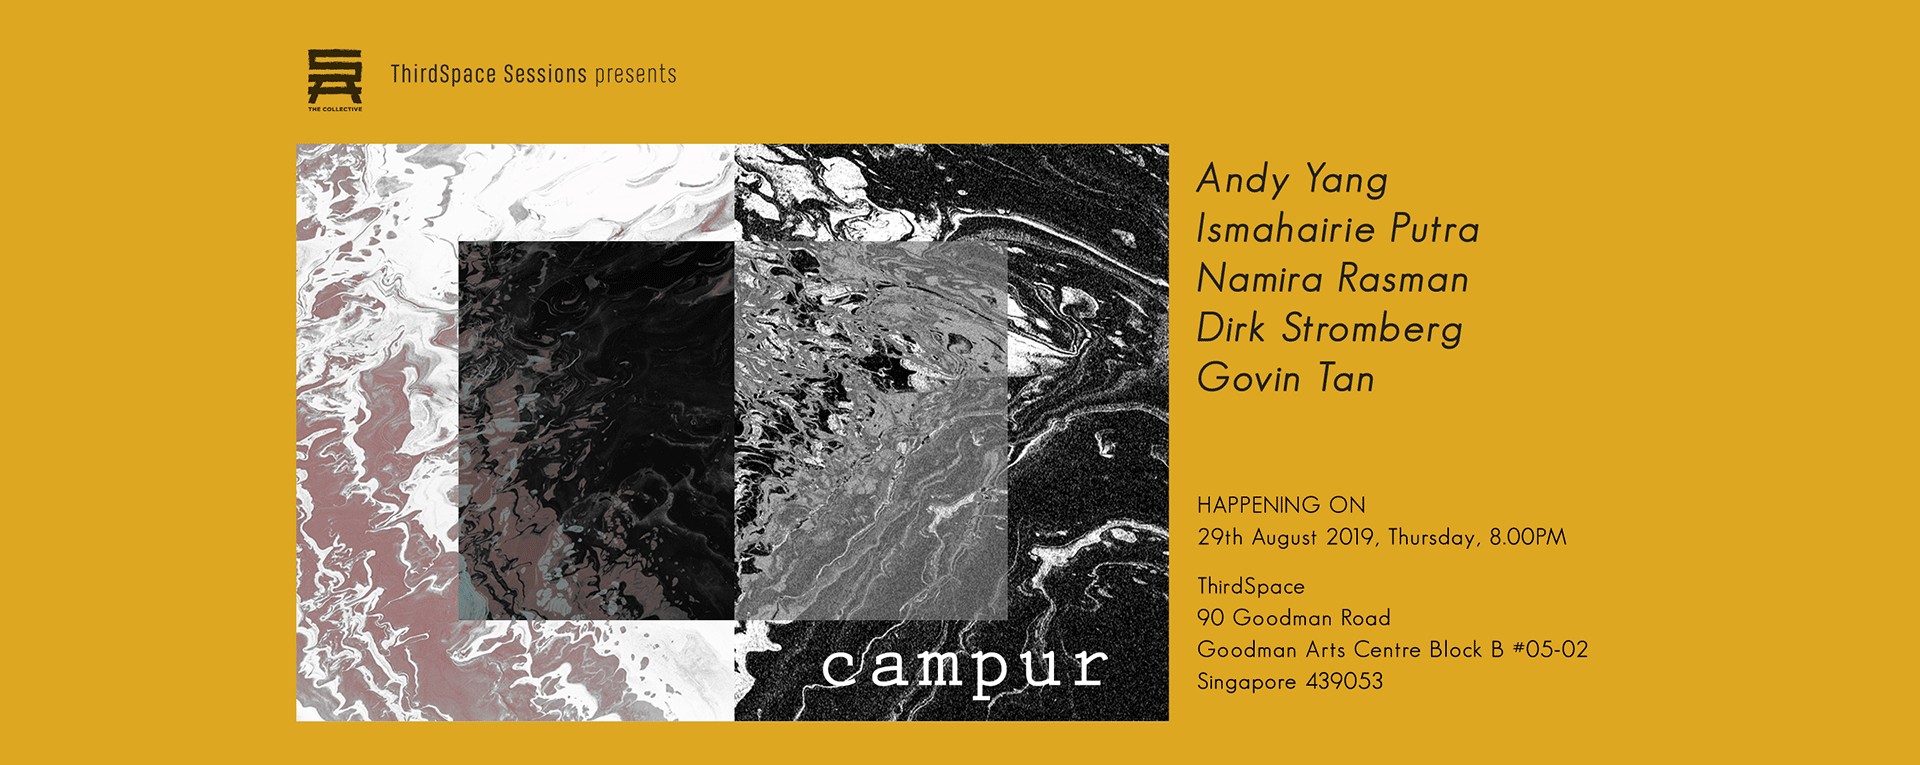 ThirdSpace Sessions presents: Campur